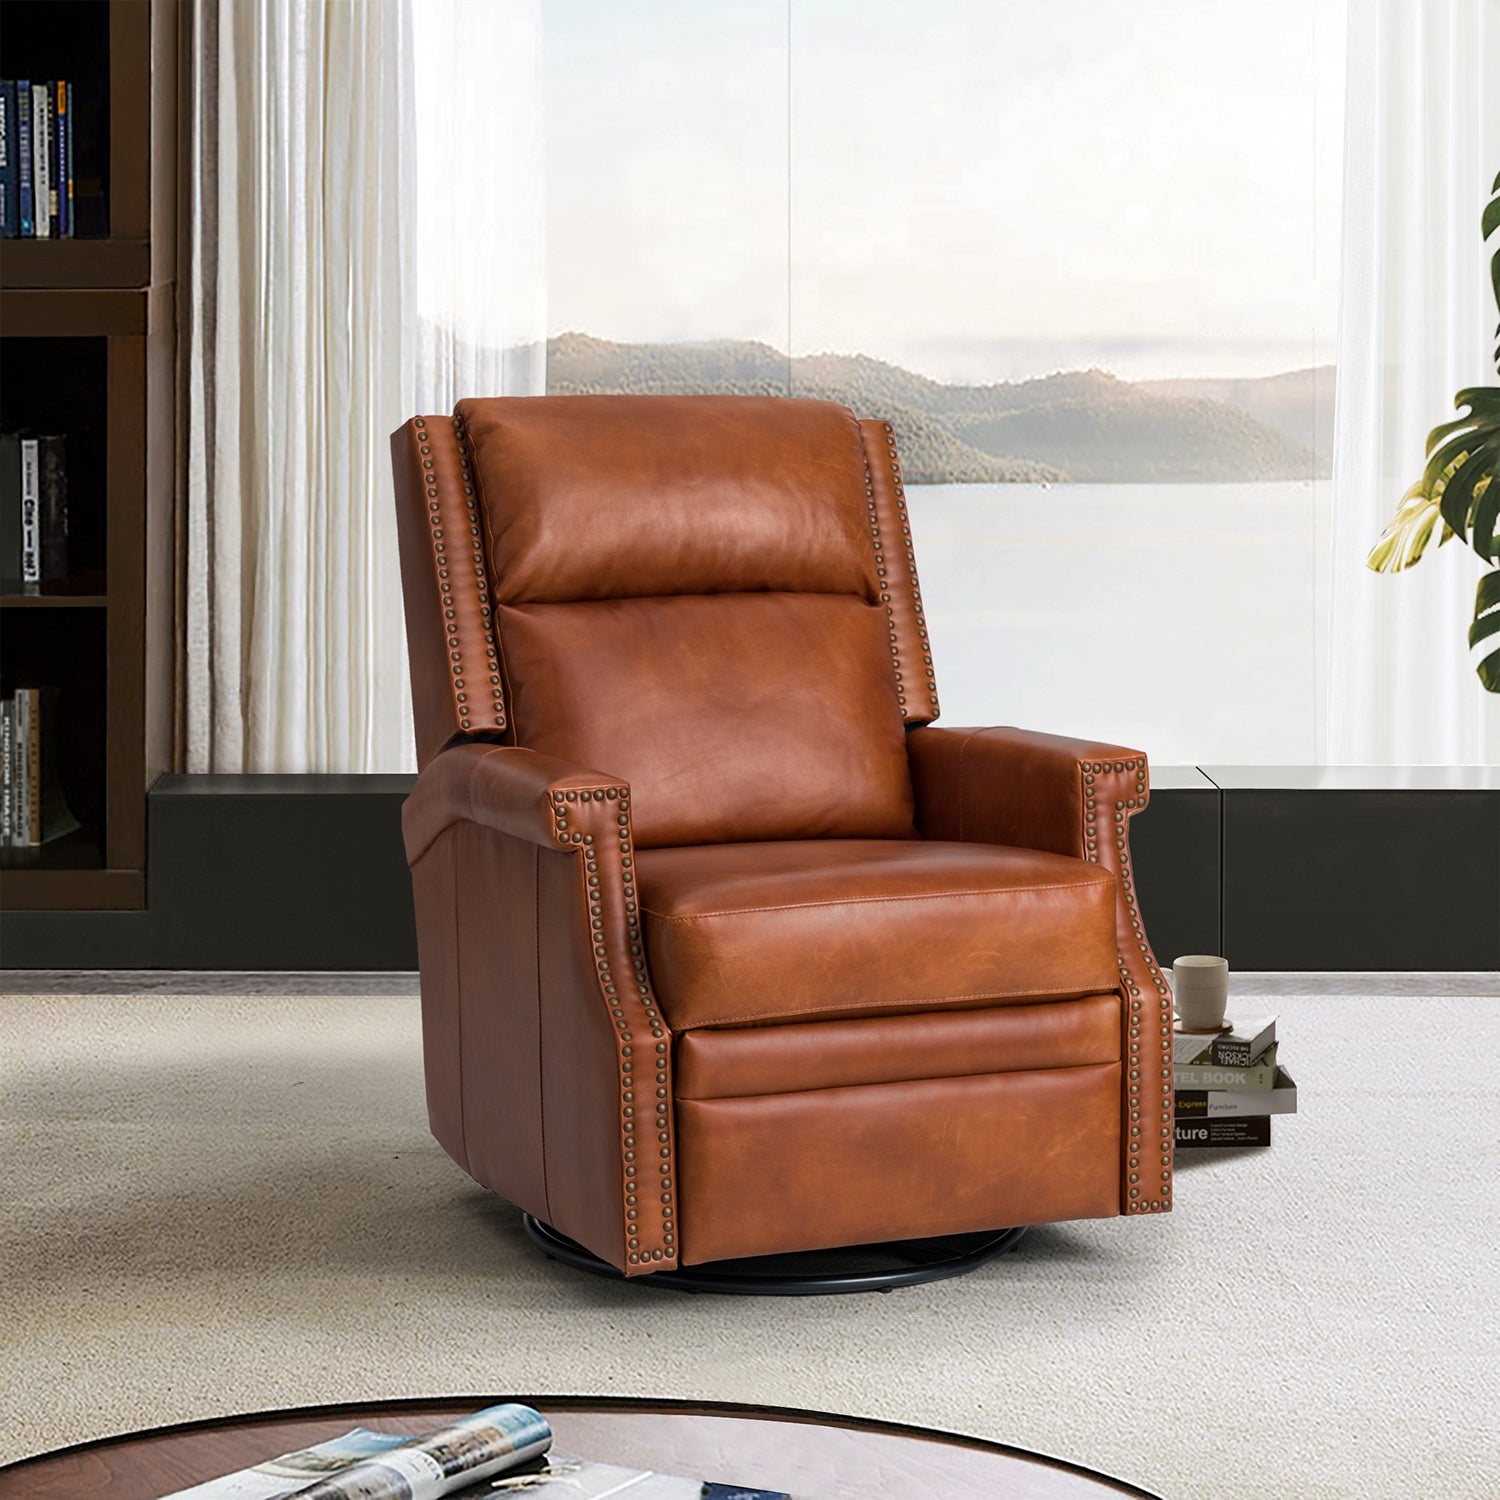 Comfortable Echidna Genuine Leather Swivel Rocker Recliner with Nailhead Trim for Living Room